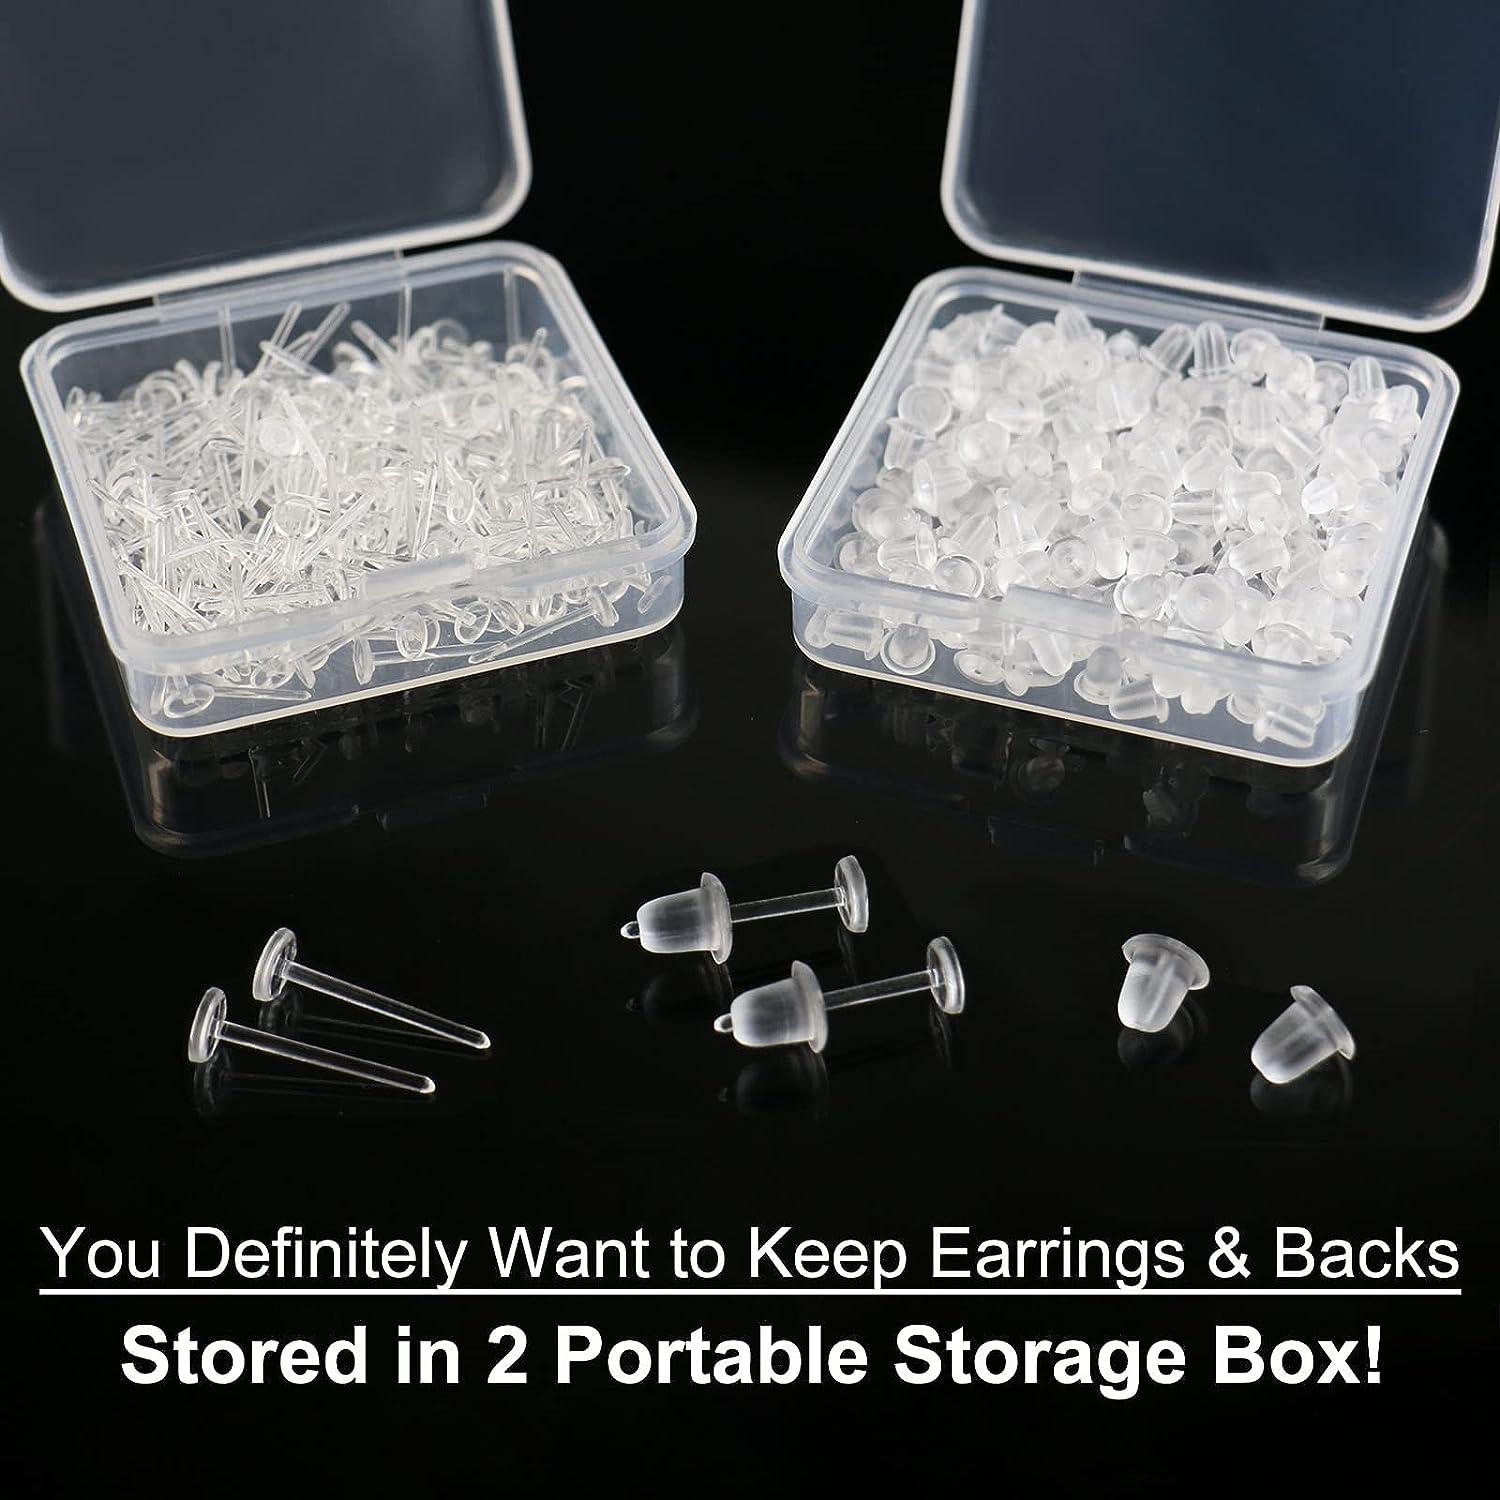 Clear Earrings For Sports, 400Pcs 18g Plastic Earrings For Sensitive Ears,  Clear Stud Earrings for Work with Solid Plastic Posts and Soft Rubber Earring  Backs in 2 Organizer Box 4mm Flat-Head Clear